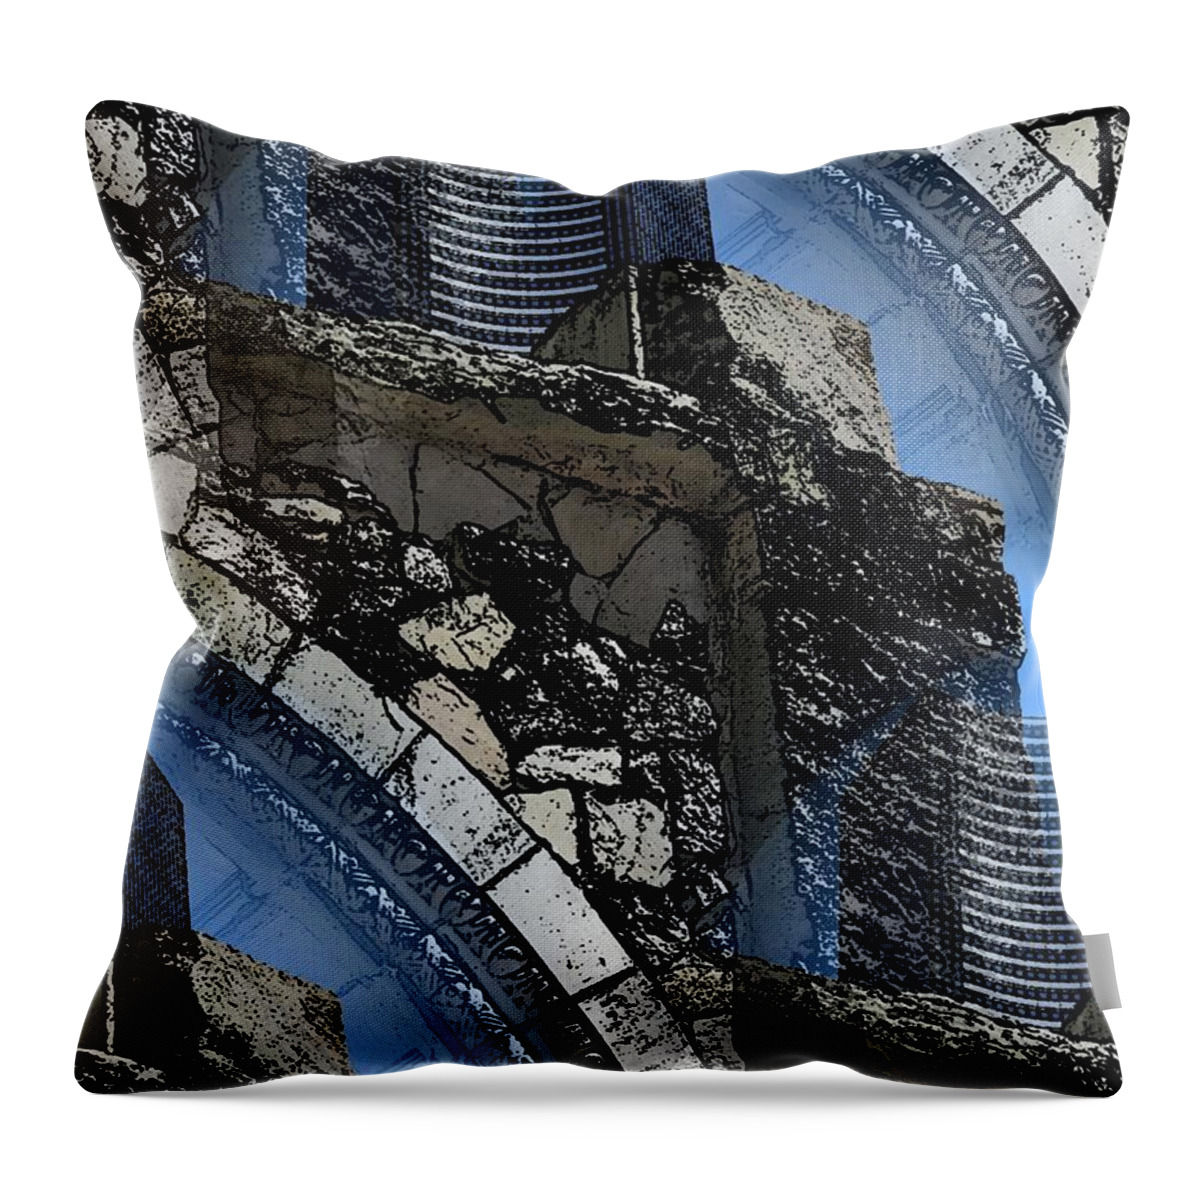 Pathway Throw Pillow featuring the digital art Pathway To Present by Tim Allen